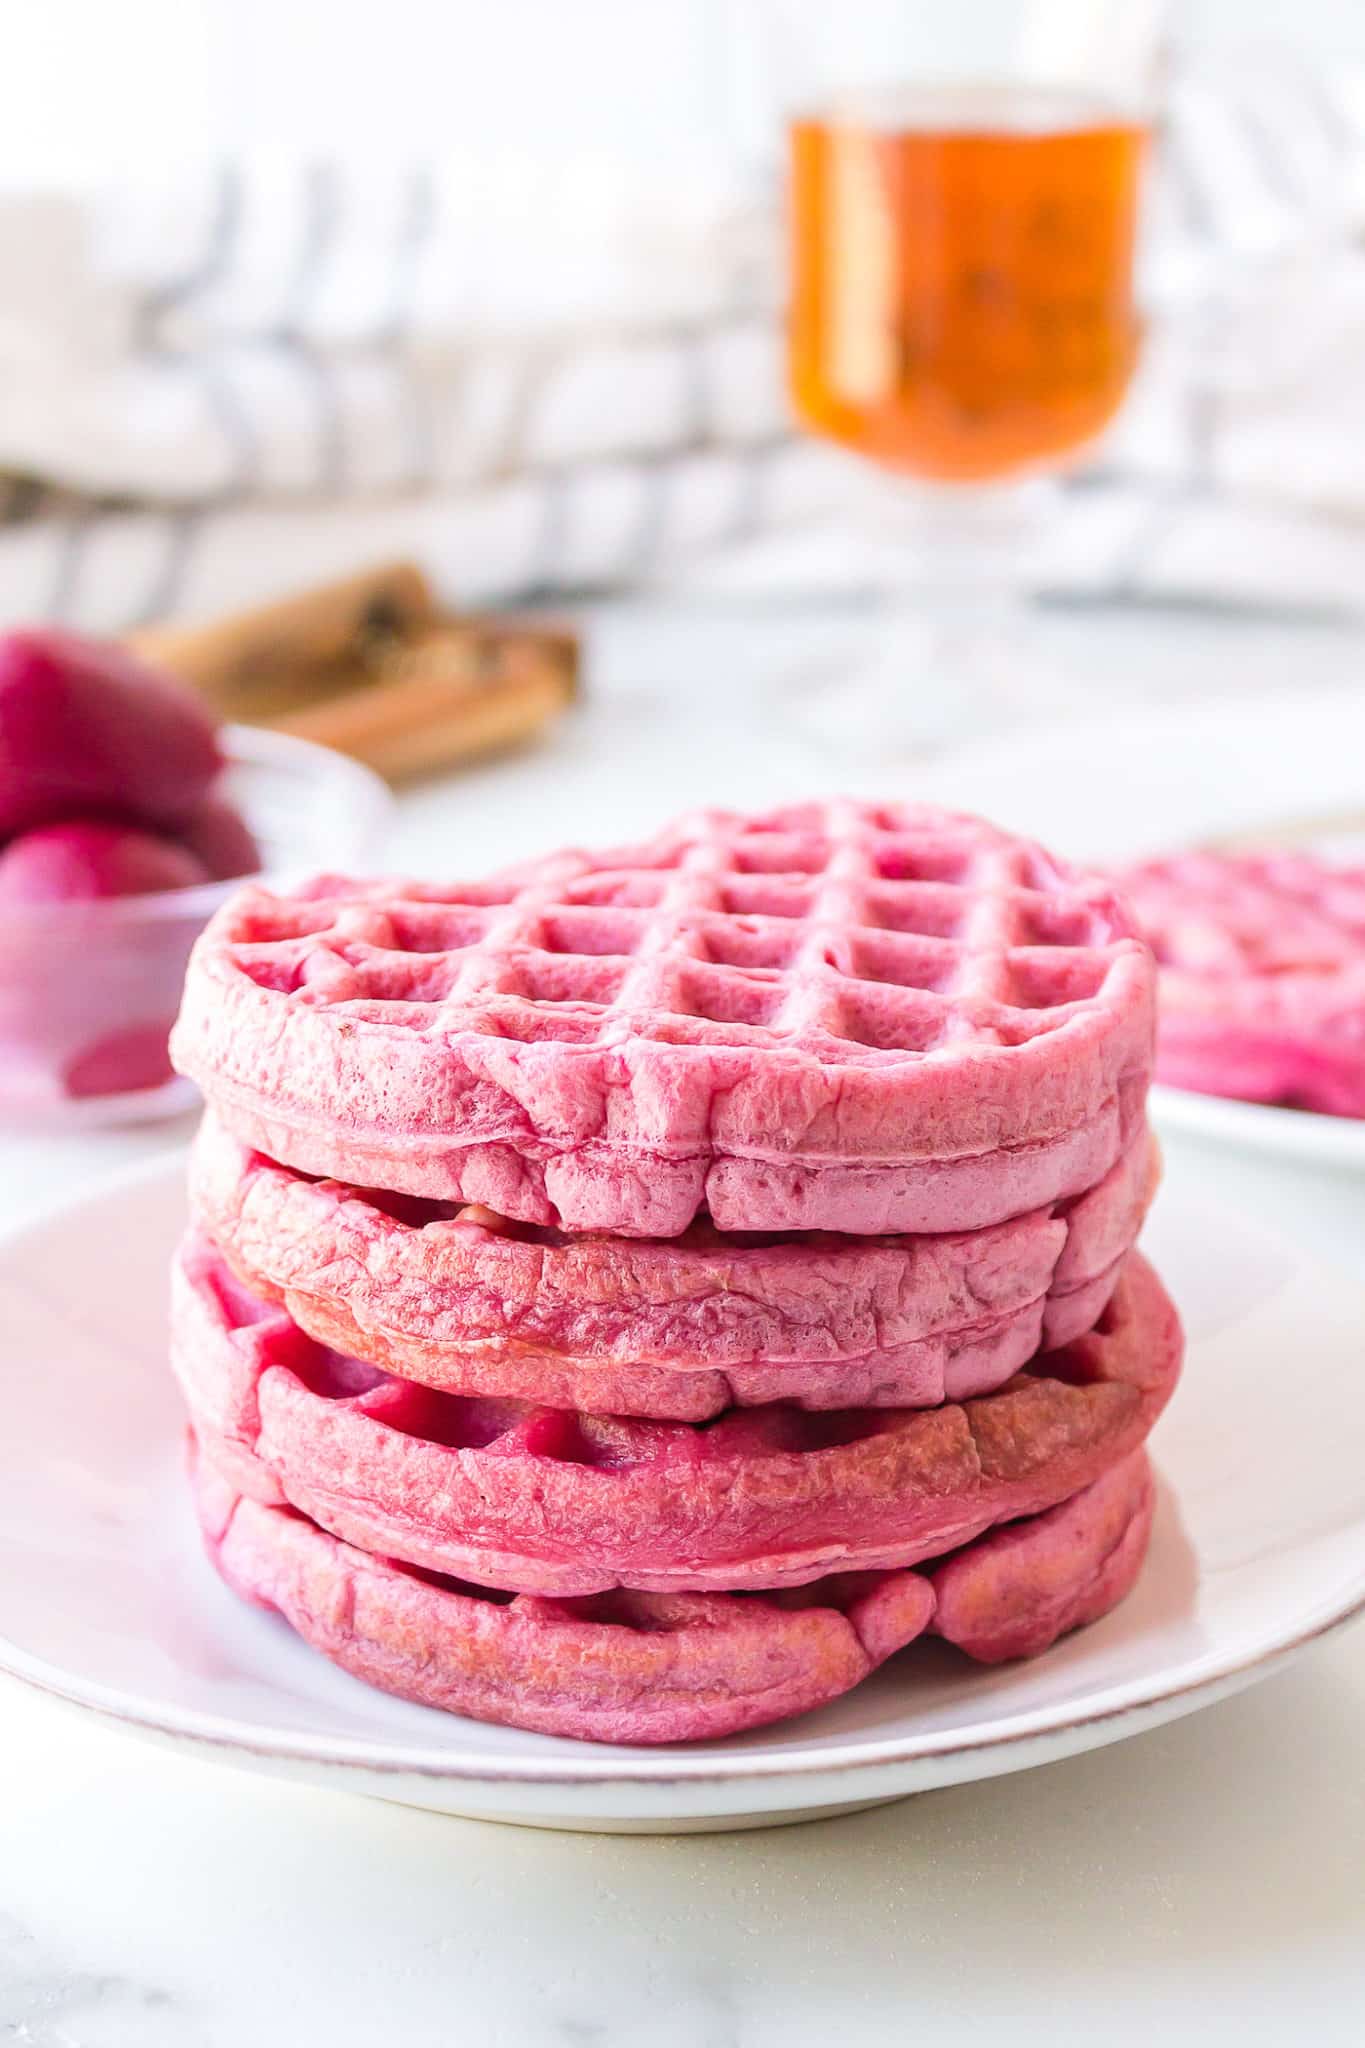 A stack of four pink waffles on a white plate.